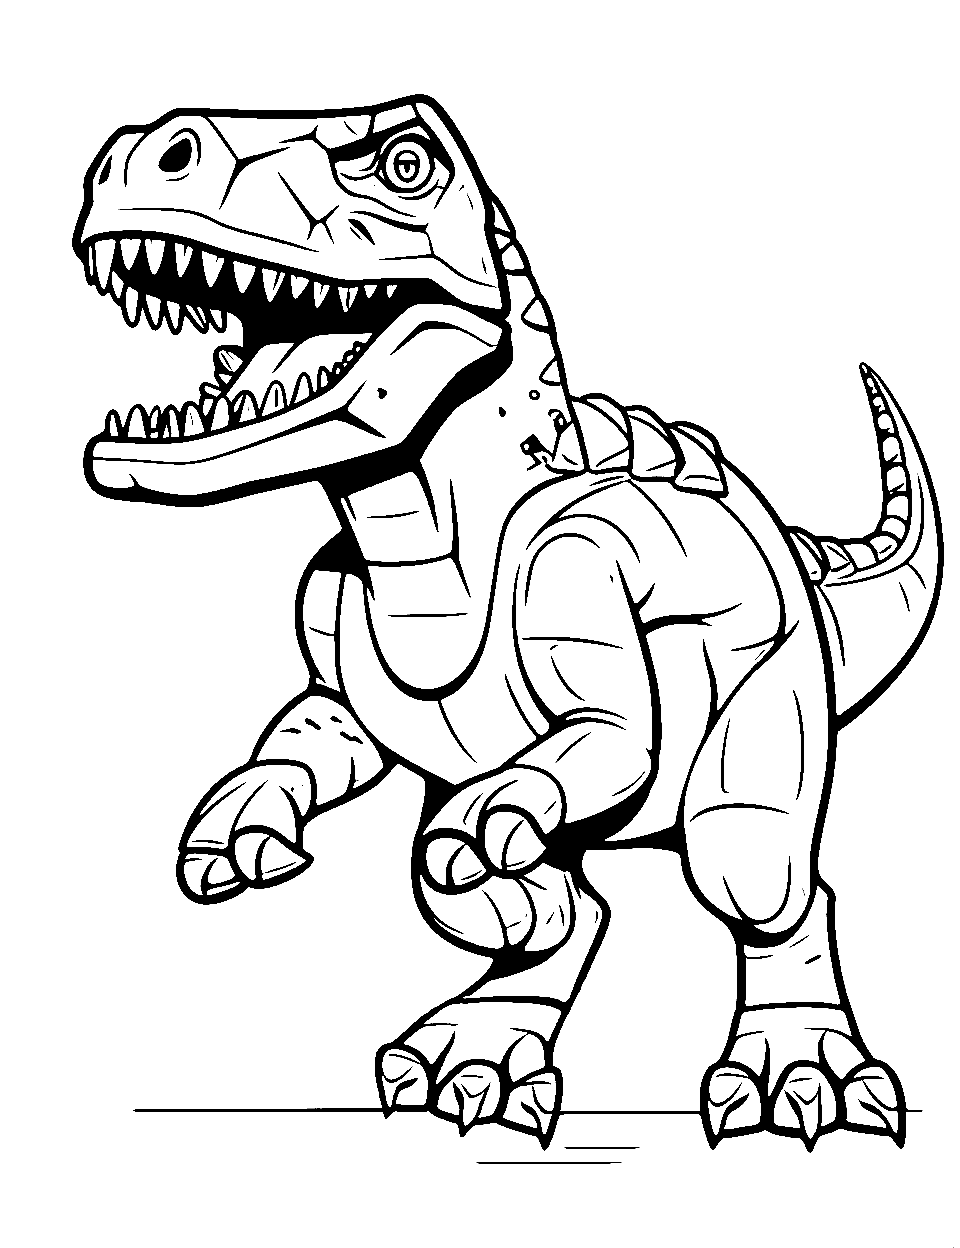 Lego T Rex Adventure T-rex Coloring Page - A blocky-style T-Rex made of Lego pieces.